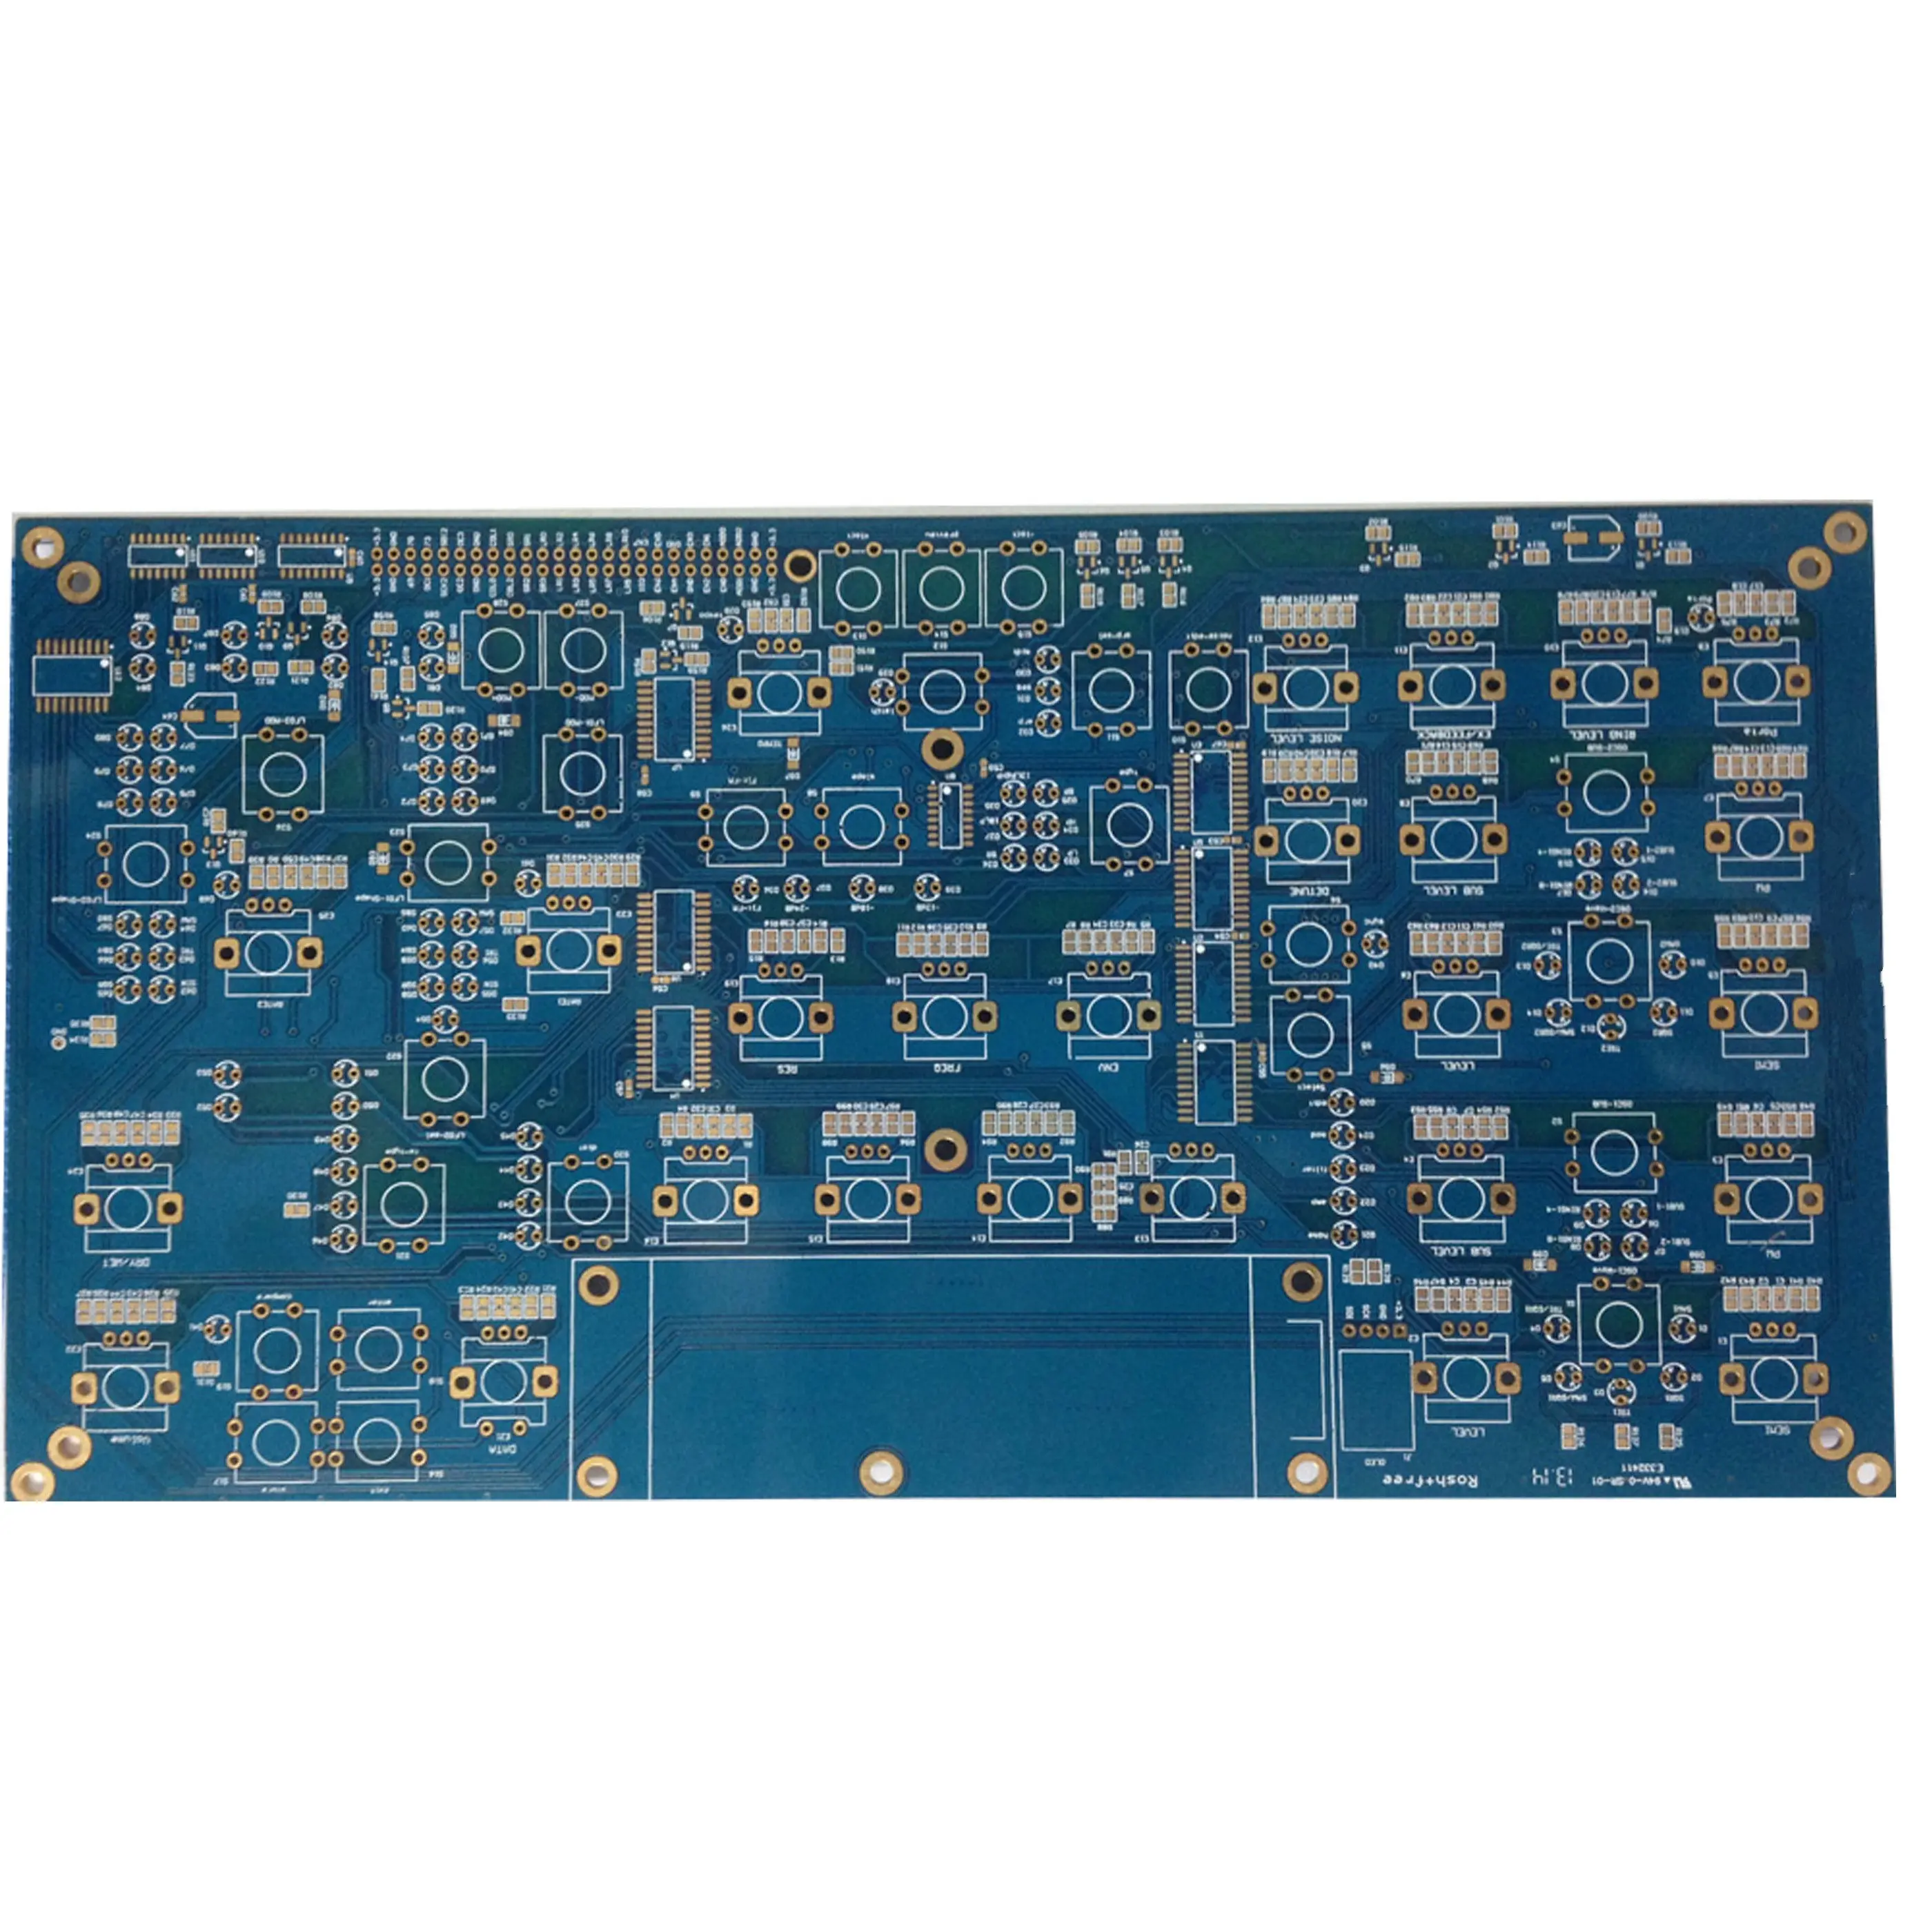 SPCBA PCB Prototype 1OZ PWB Prototype Printed Circuit Board Assembly For Industrial Control